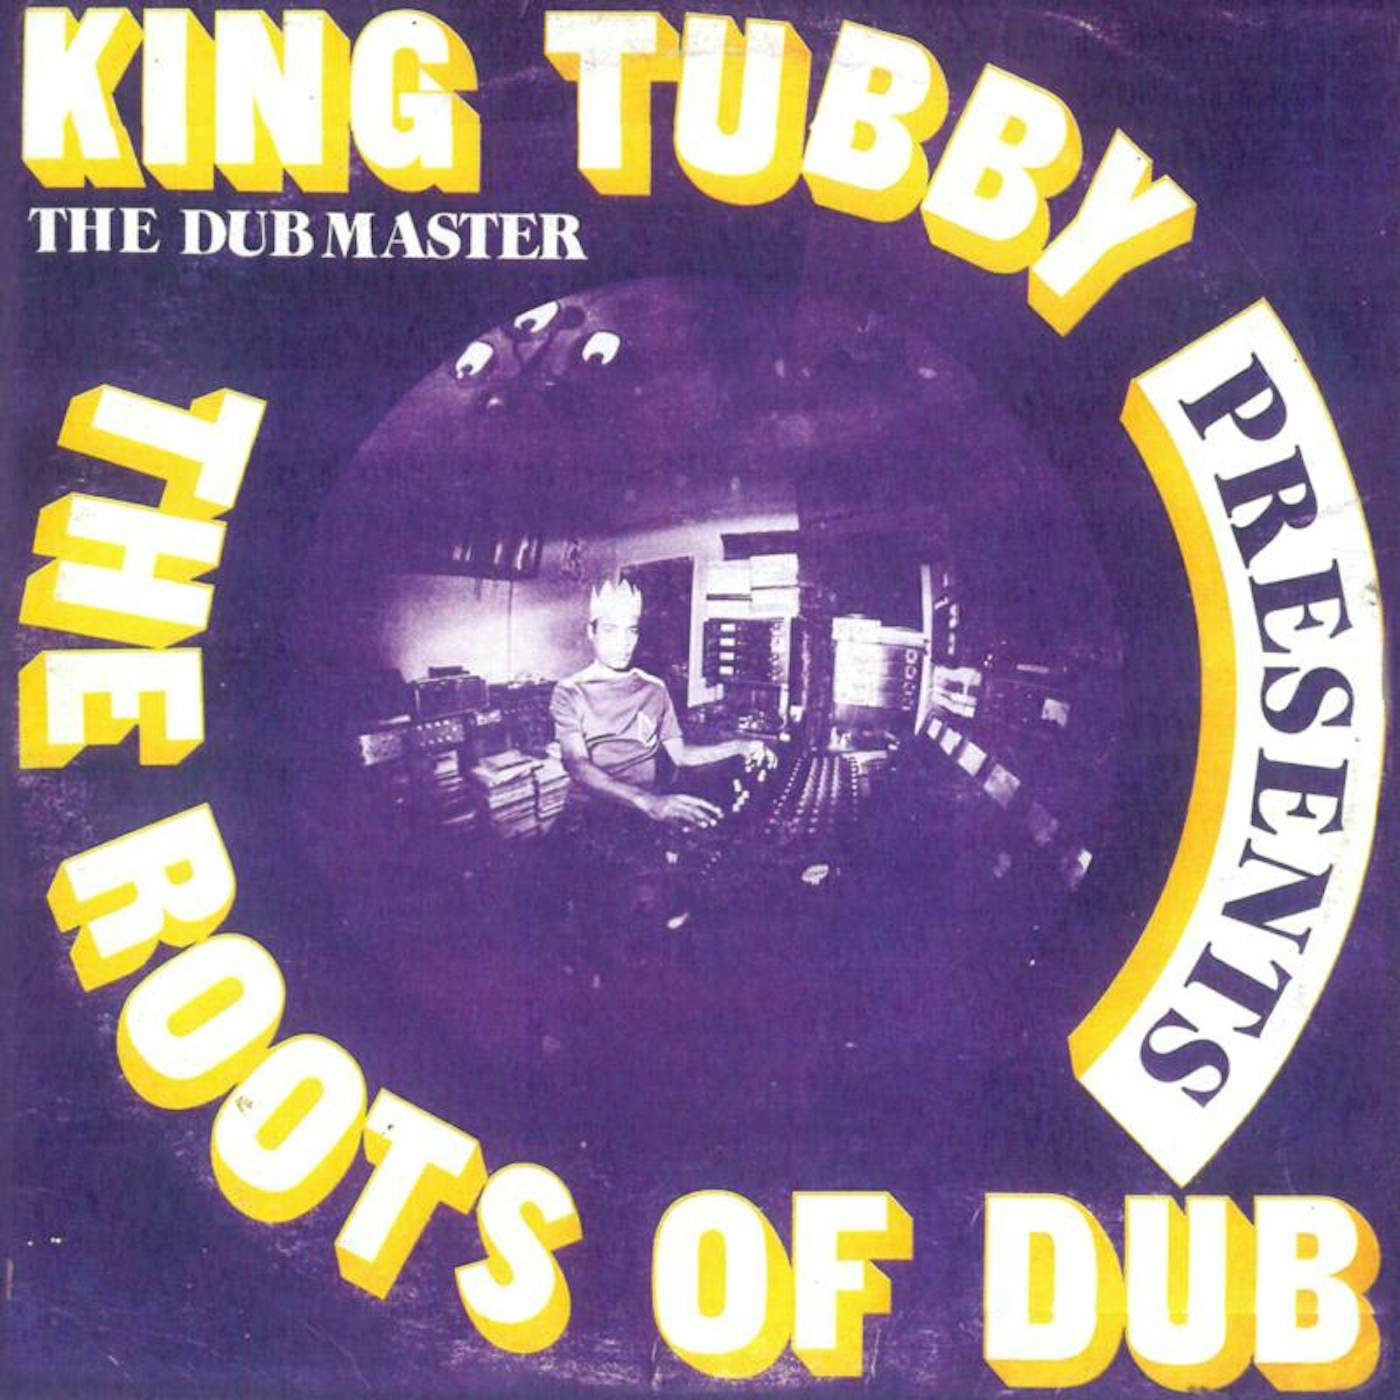 King Tubby LP - The Roots Of Dub (Vinyl)